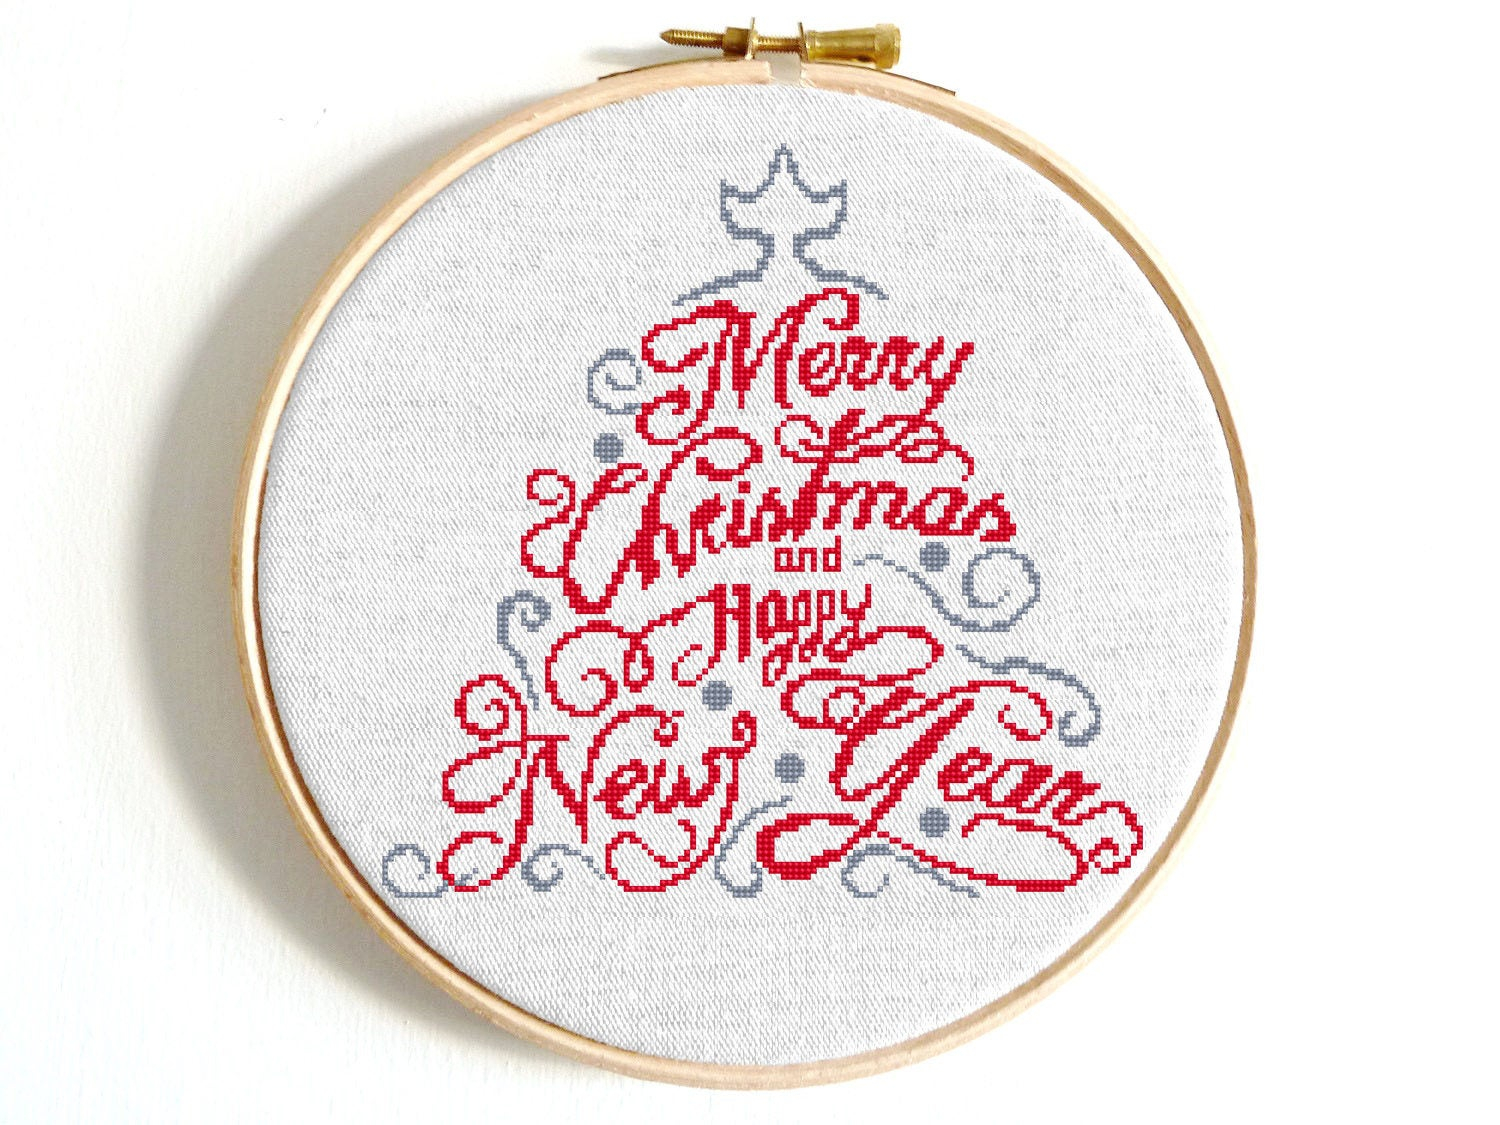 Embroidery Sampler Patterns Merry Christmas Cross Stitch Happy New Year Embroidery Sampler Christmas Tree Ornaments Counted Cross Stitch Modern Cross Stitch Pdf Diy